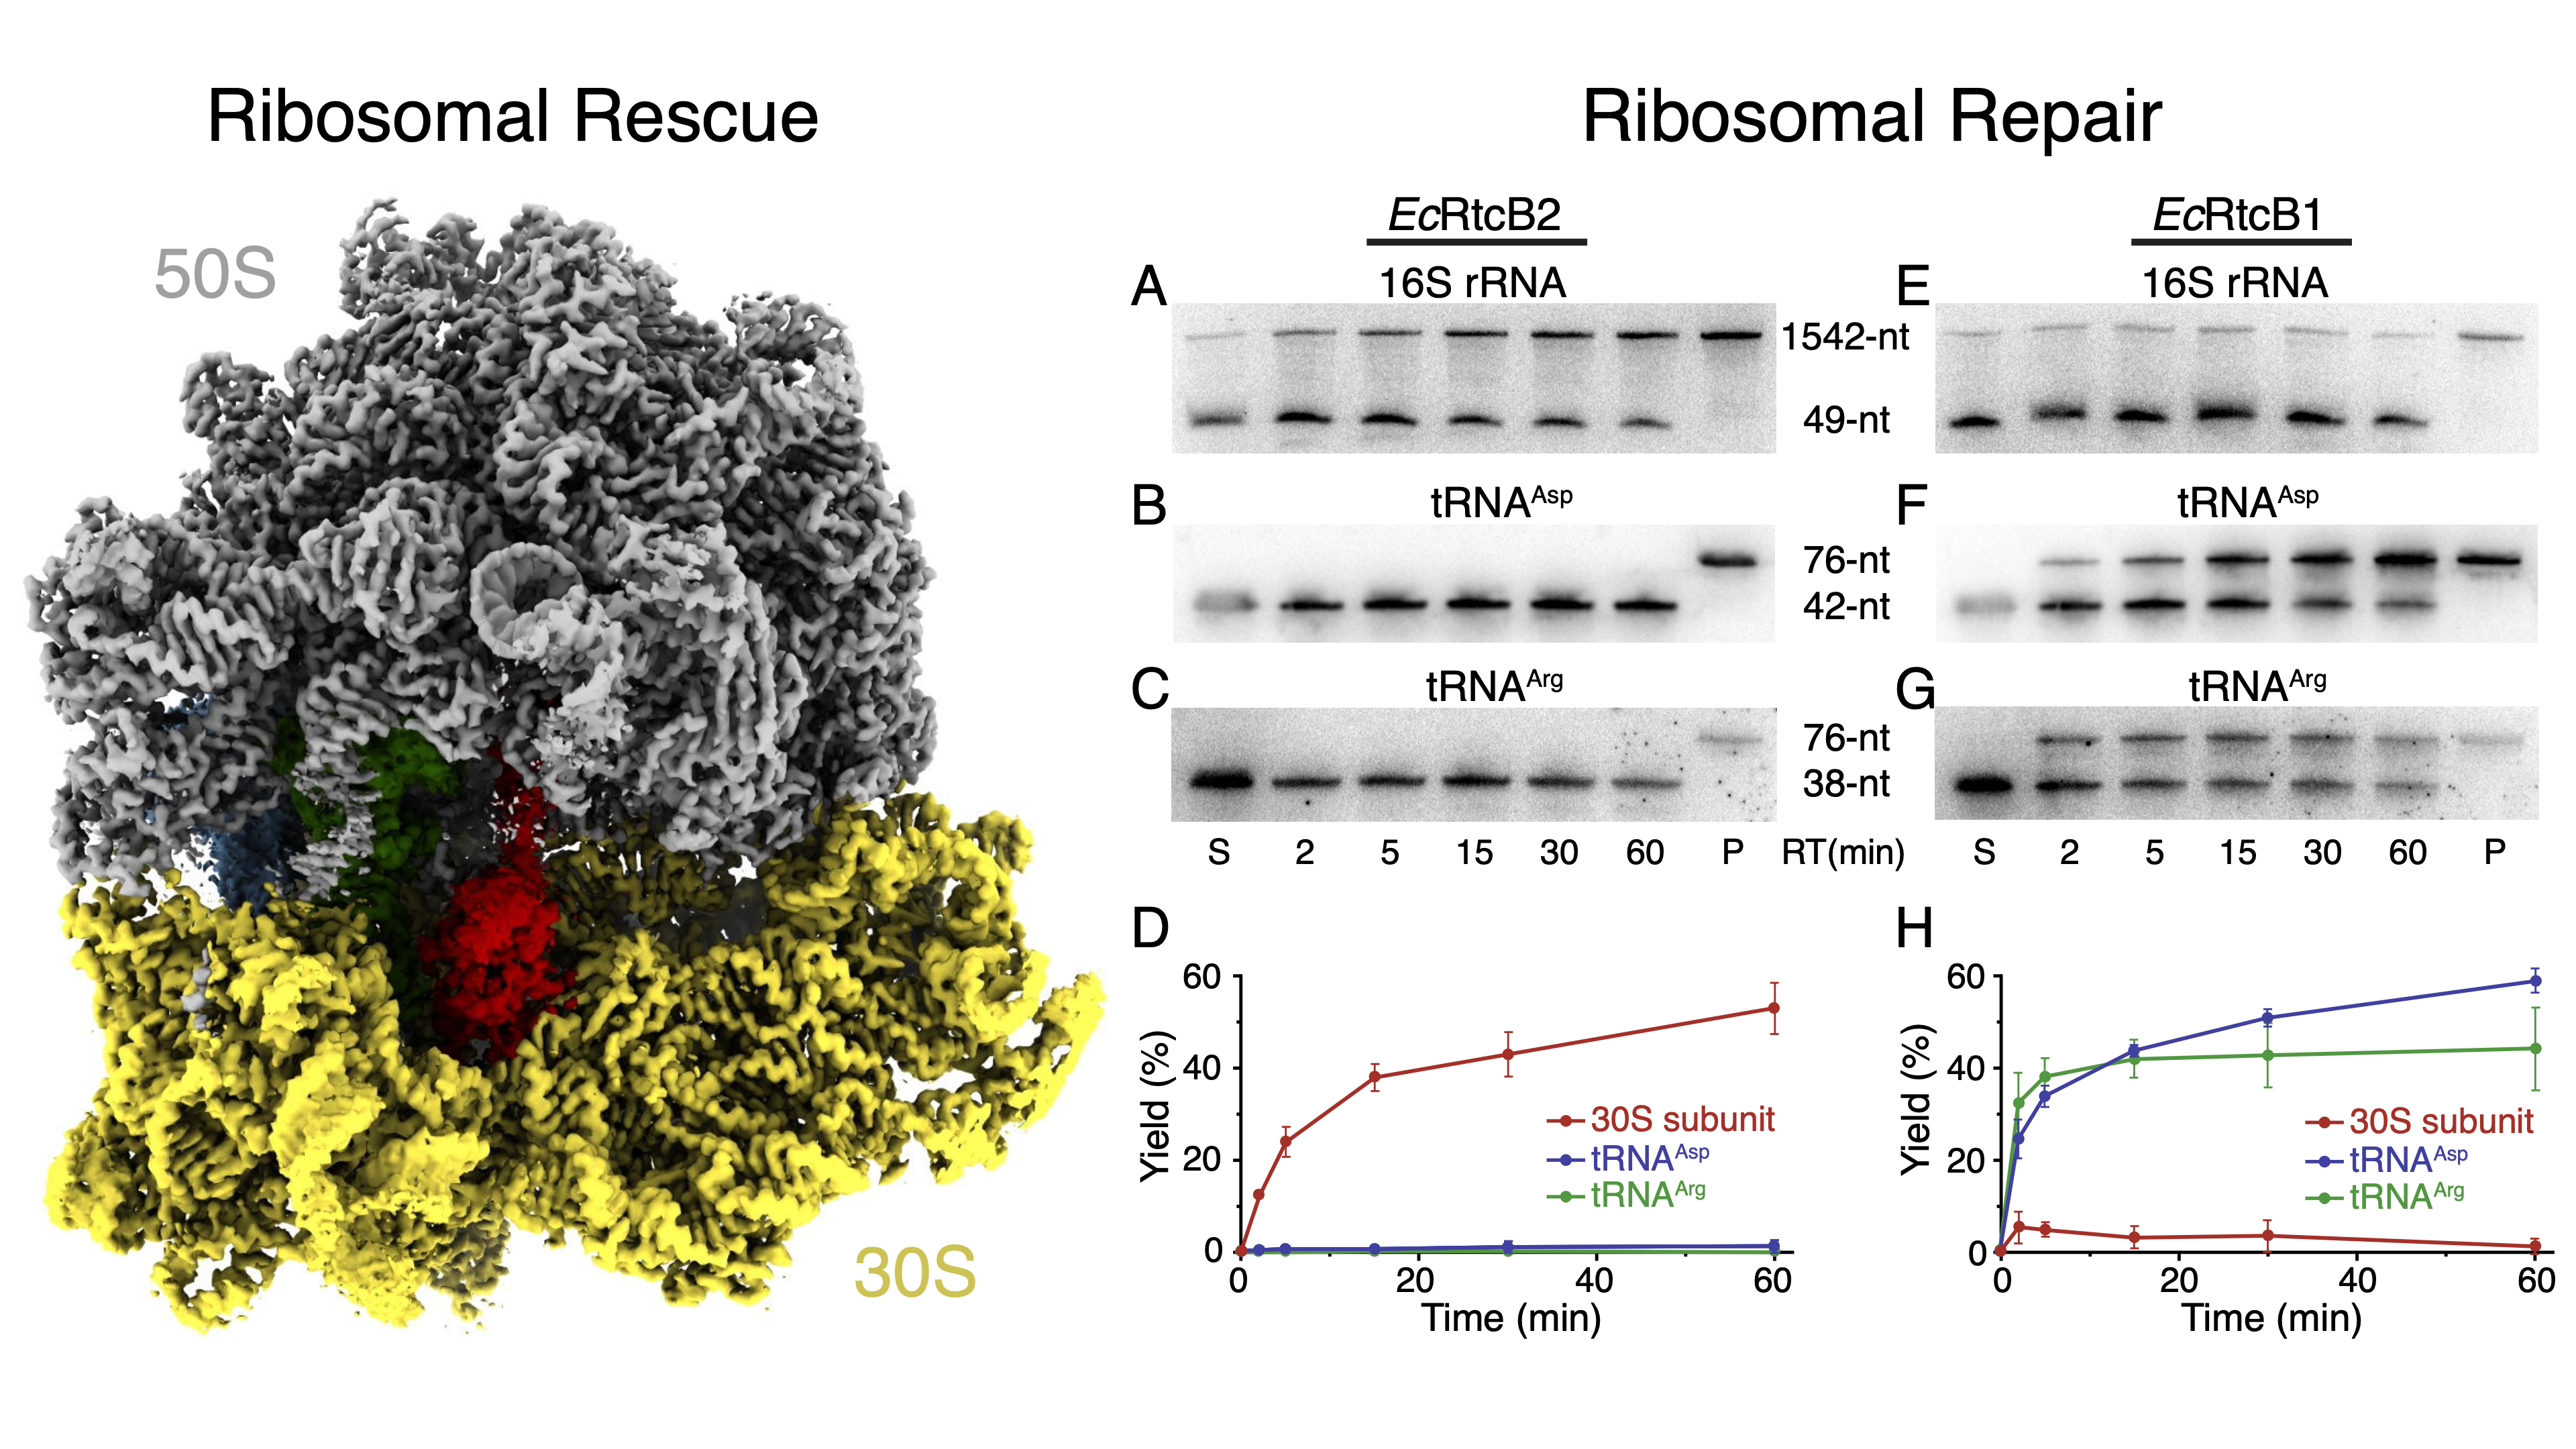  image of ribosomal rescue research image